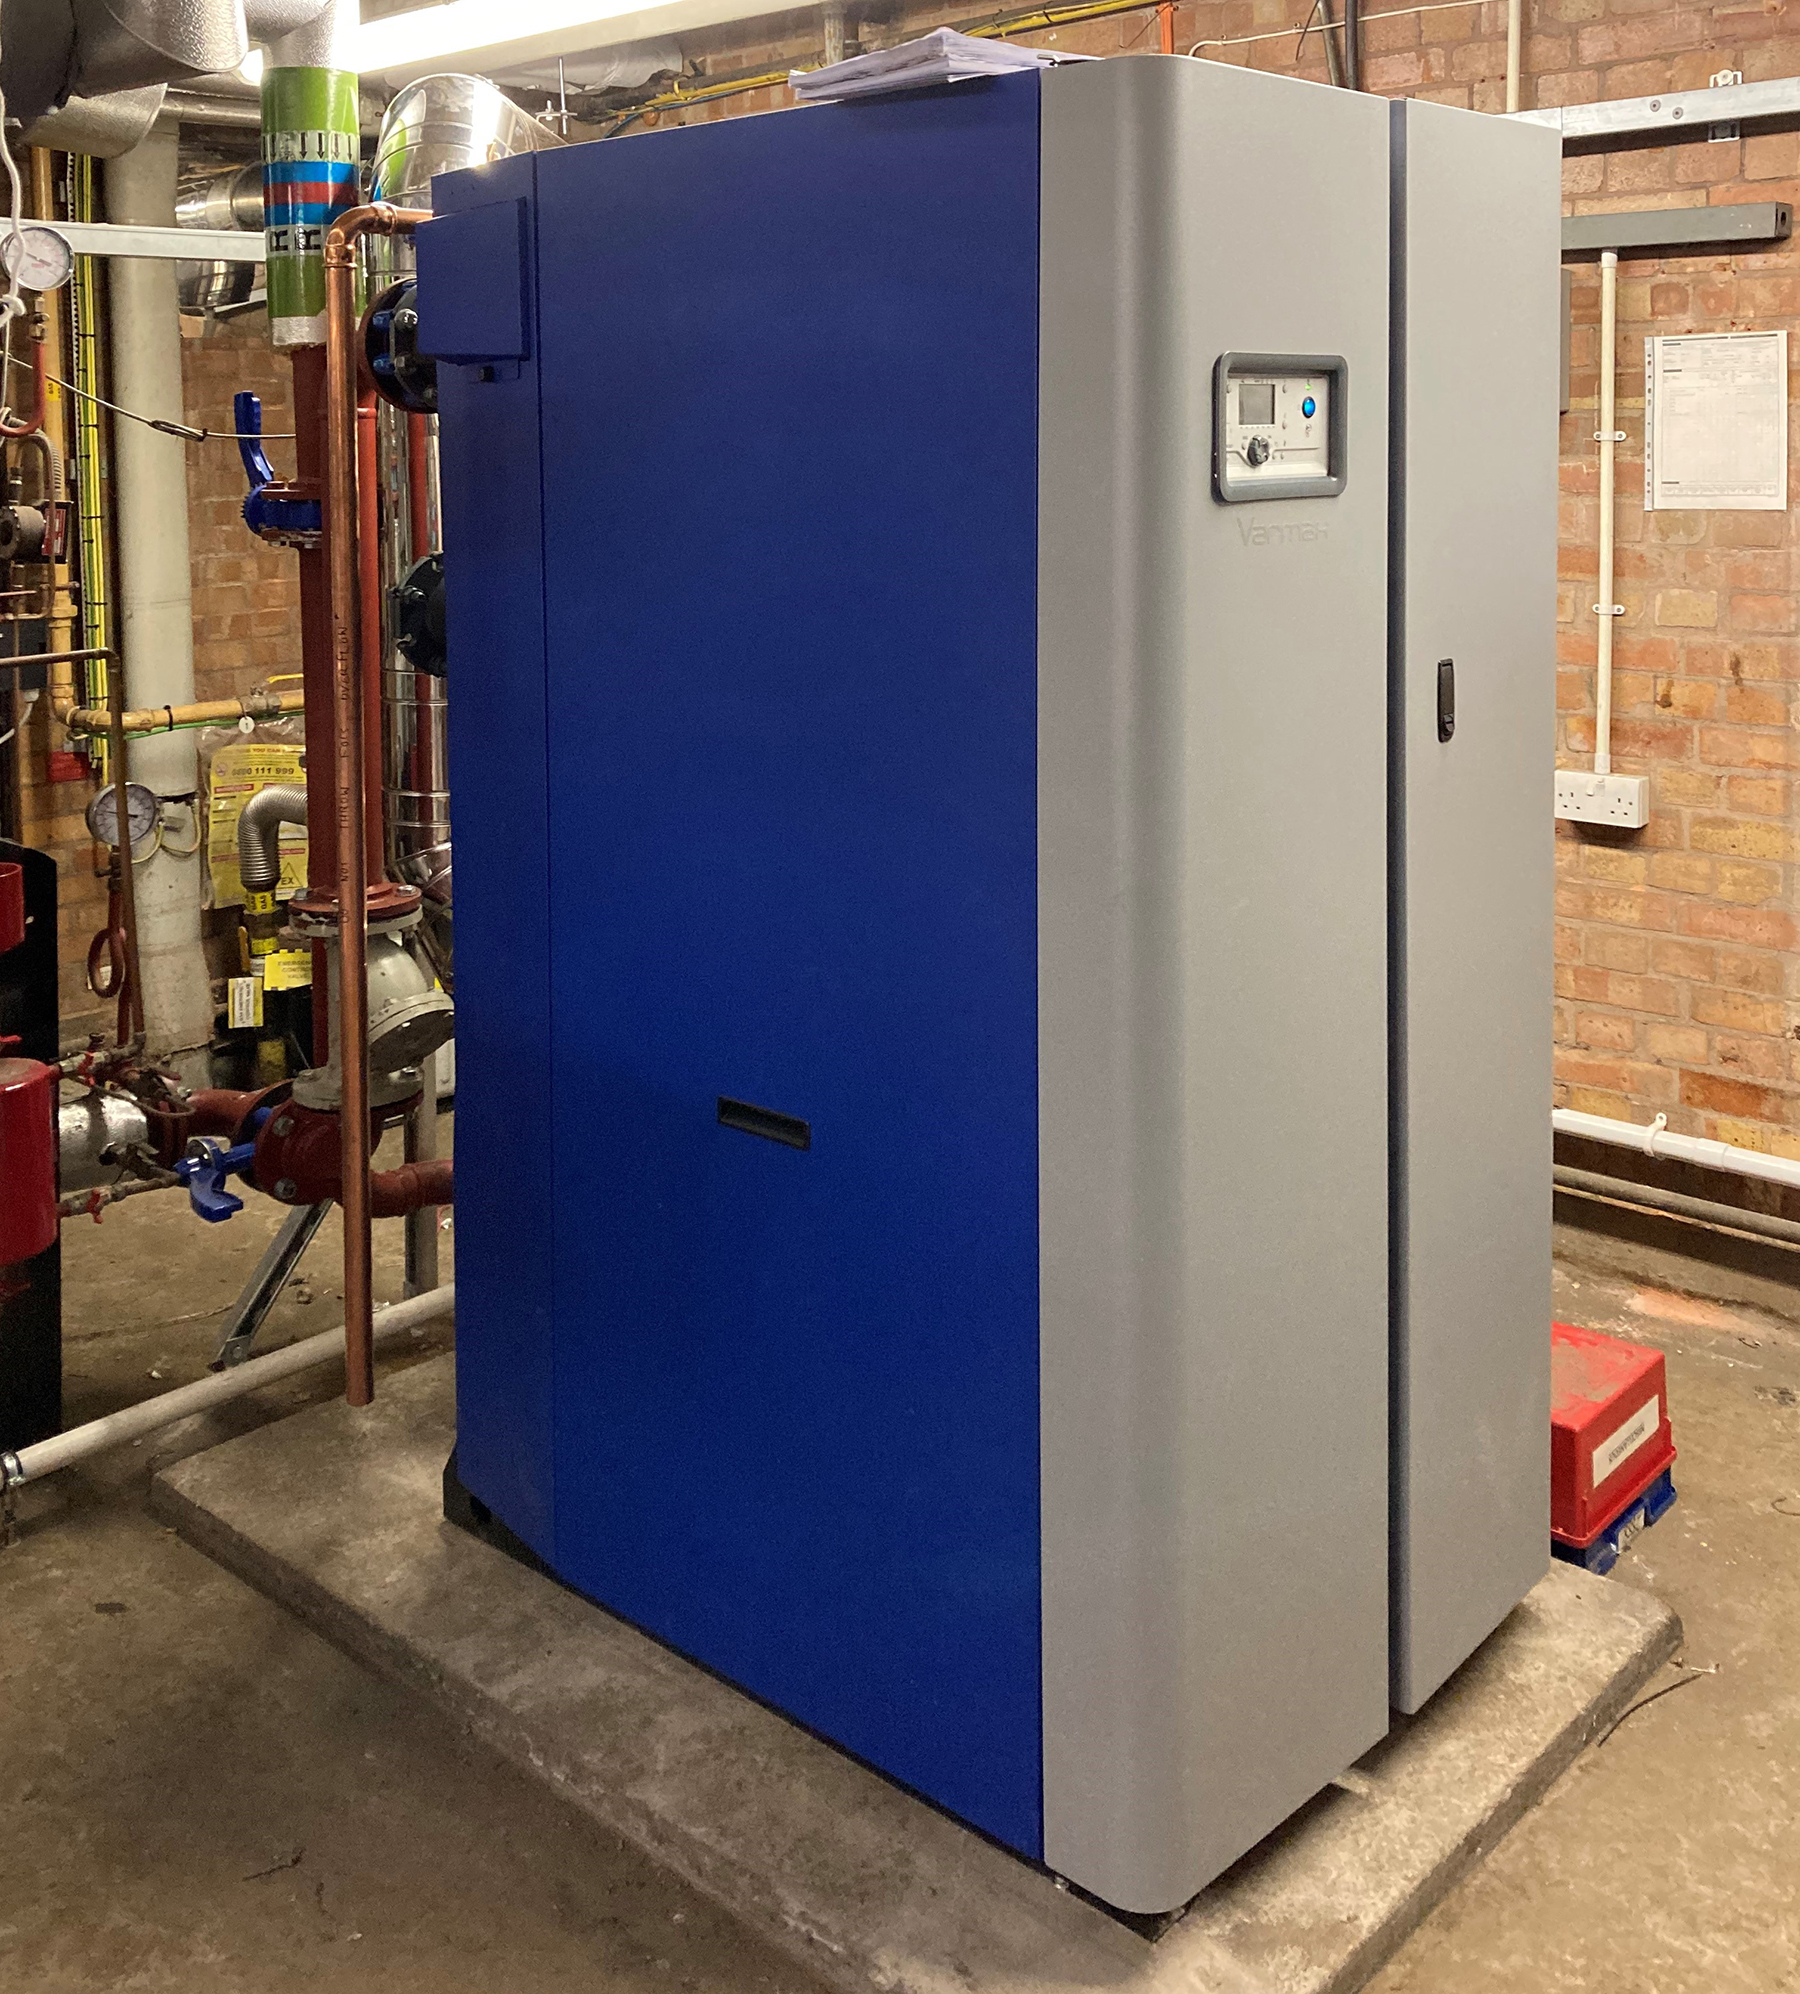 New boiler for Cheshire Constabulary